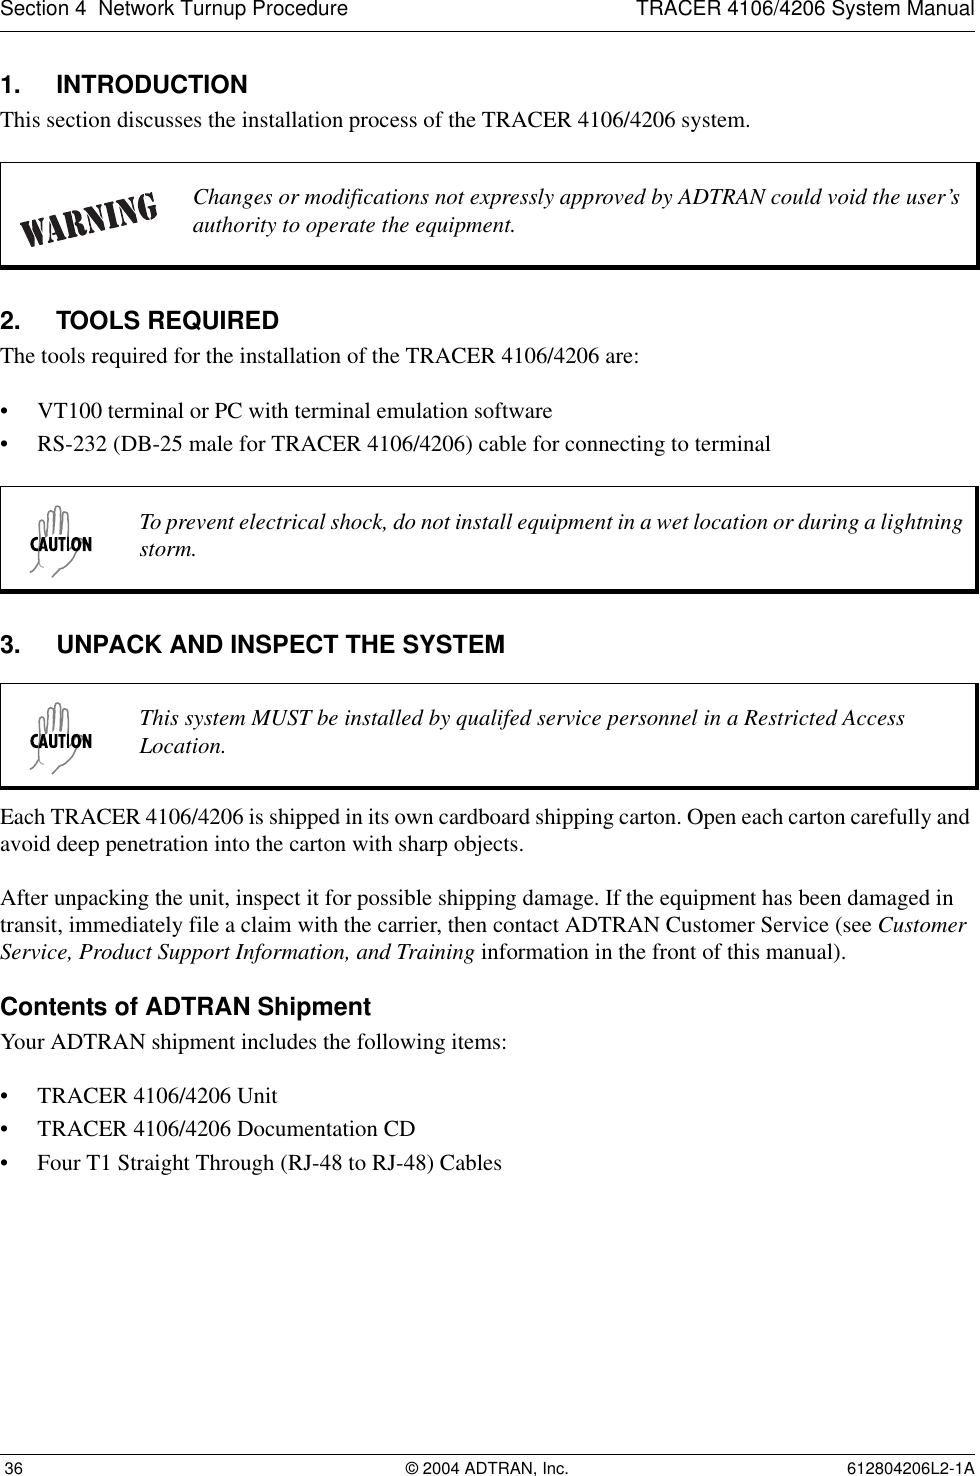 Section 4  Network Turnup Procedure TRACER 4106/4206 System Manual 36 © 2004 ADTRAN, Inc. 612804206L2-1A1. INTRODUCTIONThis section discusses the installation process of the TRACER 4106/4206 system.2. TOOLS REQUIREDThe tools required for the installation of the TRACER 4106/4206 are:• VT100 terminal or PC with terminal emulation software• RS-232 (DB-25 male for TRACER 4106/4206) cable for connecting to terminal3. UNPACK AND INSPECT THE SYSTEMEach TRACER 4106/4206 is shipped in its own cardboard shipping carton. Open each carton carefully and avoid deep penetration into the carton with sharp objects. After unpacking the unit, inspect it for possible shipping damage. If the equipment has been damaged in transit, immediately file a claim with the carrier, then contact ADTRAN Customer Service (see Customer Service, Product Support Information, and Training information in the front of this manual).Contents of ADTRAN ShipmentYour ADTRAN shipment includes the following items:• TRACER 4106/4206 Unit• TRACER 4106/4206 Documentation CD• Four T1 Straight Through (RJ-48 to RJ-48) CablesChanges or modifications not expressly approved by ADTRAN could void the user’s authority to operate the equipment.To prevent electrical shock, do not install equipment in a wet location or during a lightning storm.This system MUST be installed by qualifed service personnel in a Restricted Access Location.